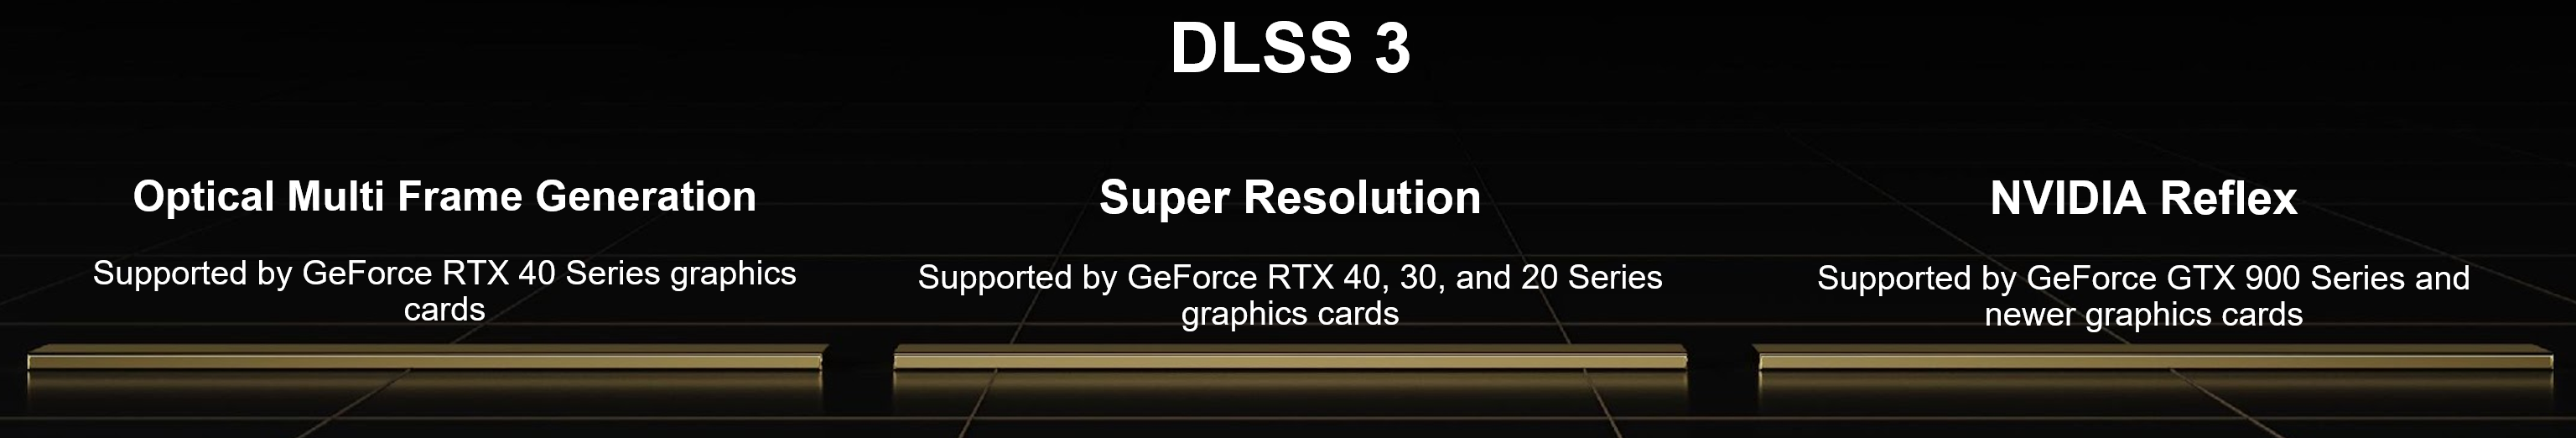 nvidia-dlss-supported-features.png